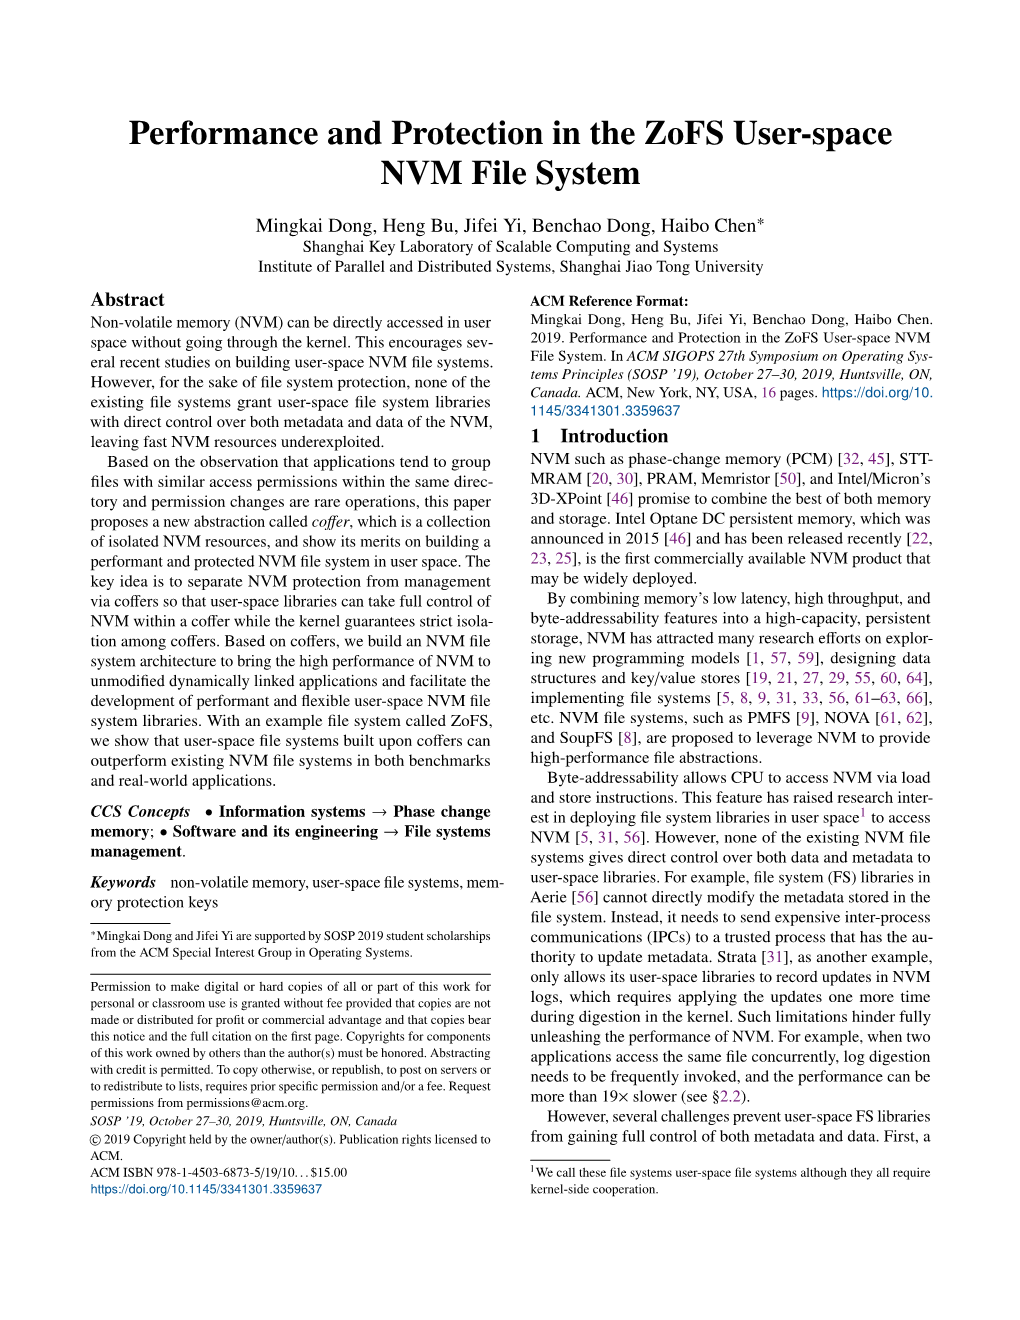 Performance and Protection in the Zofs User-Space NVM File System